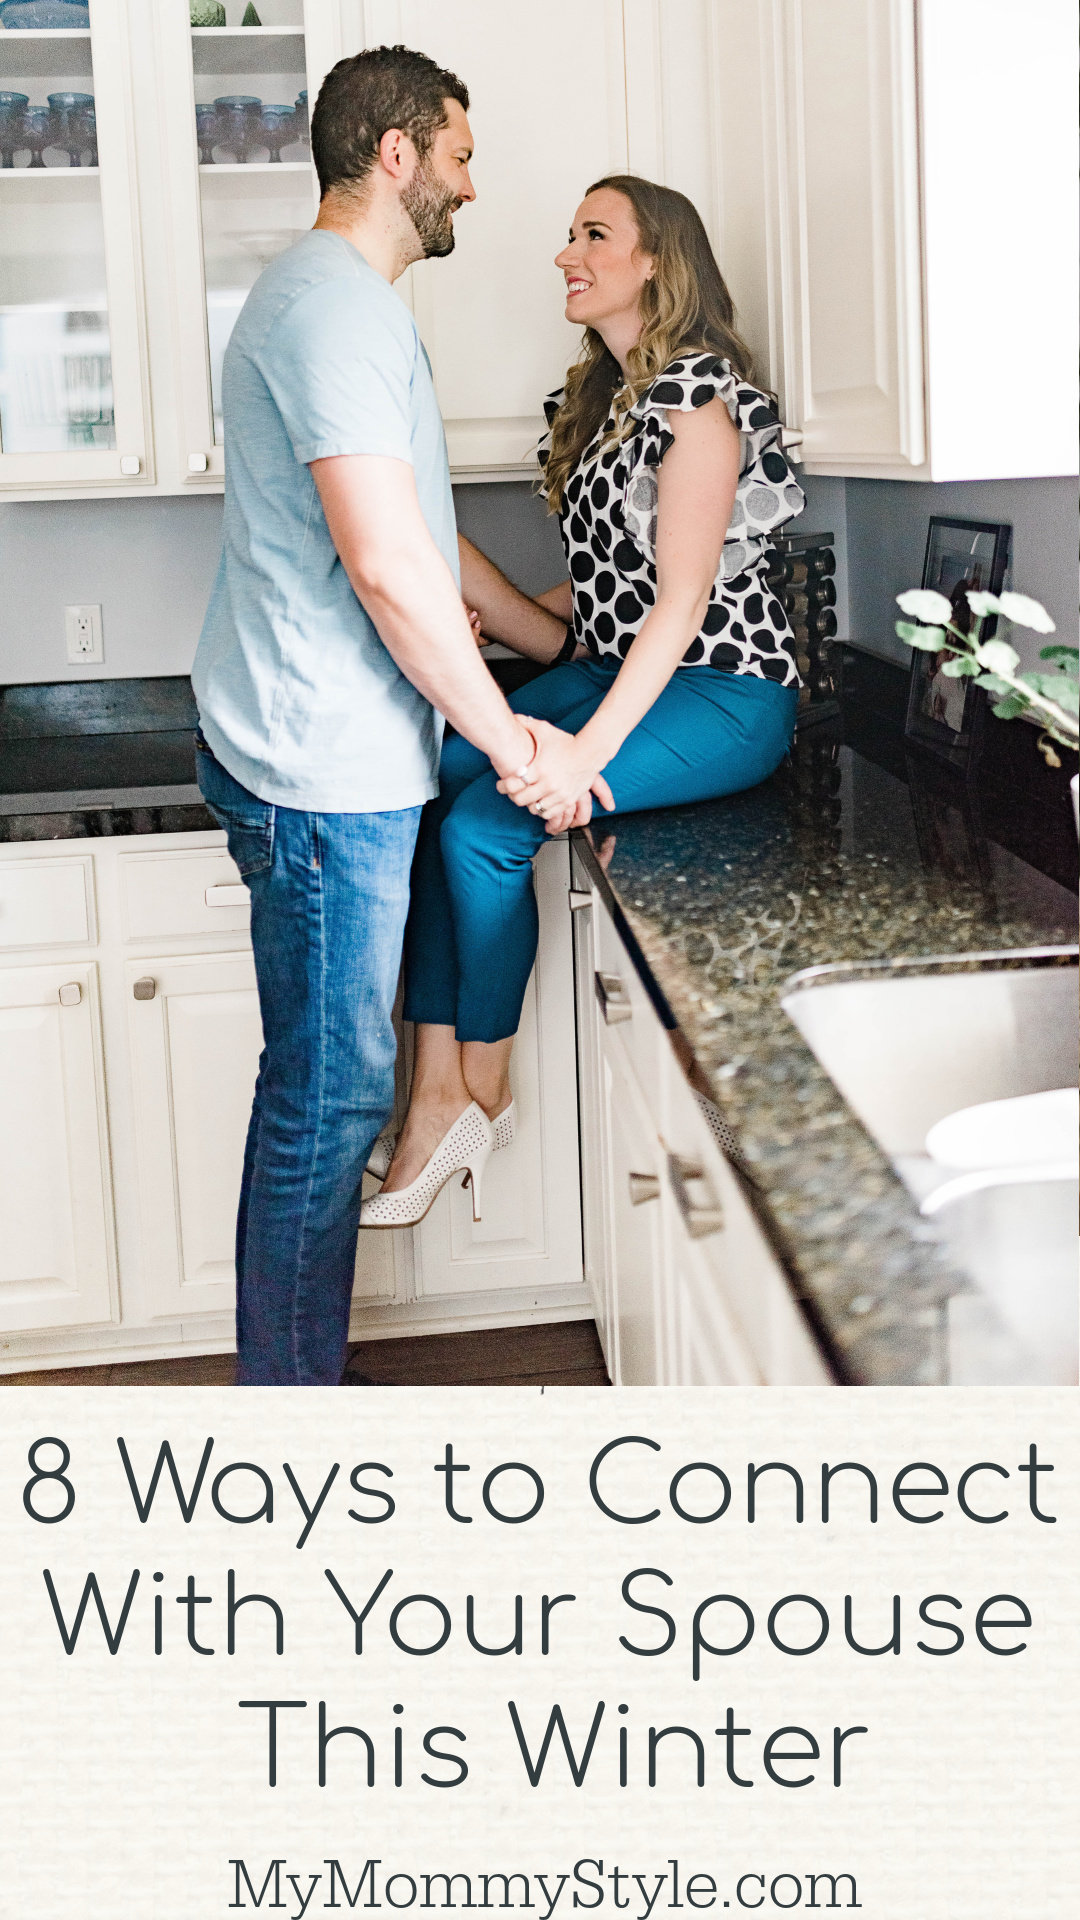 Looking for new ways to connect this winter? Connect with your spouse in these simple, meaningful ways. via @mymommystyle